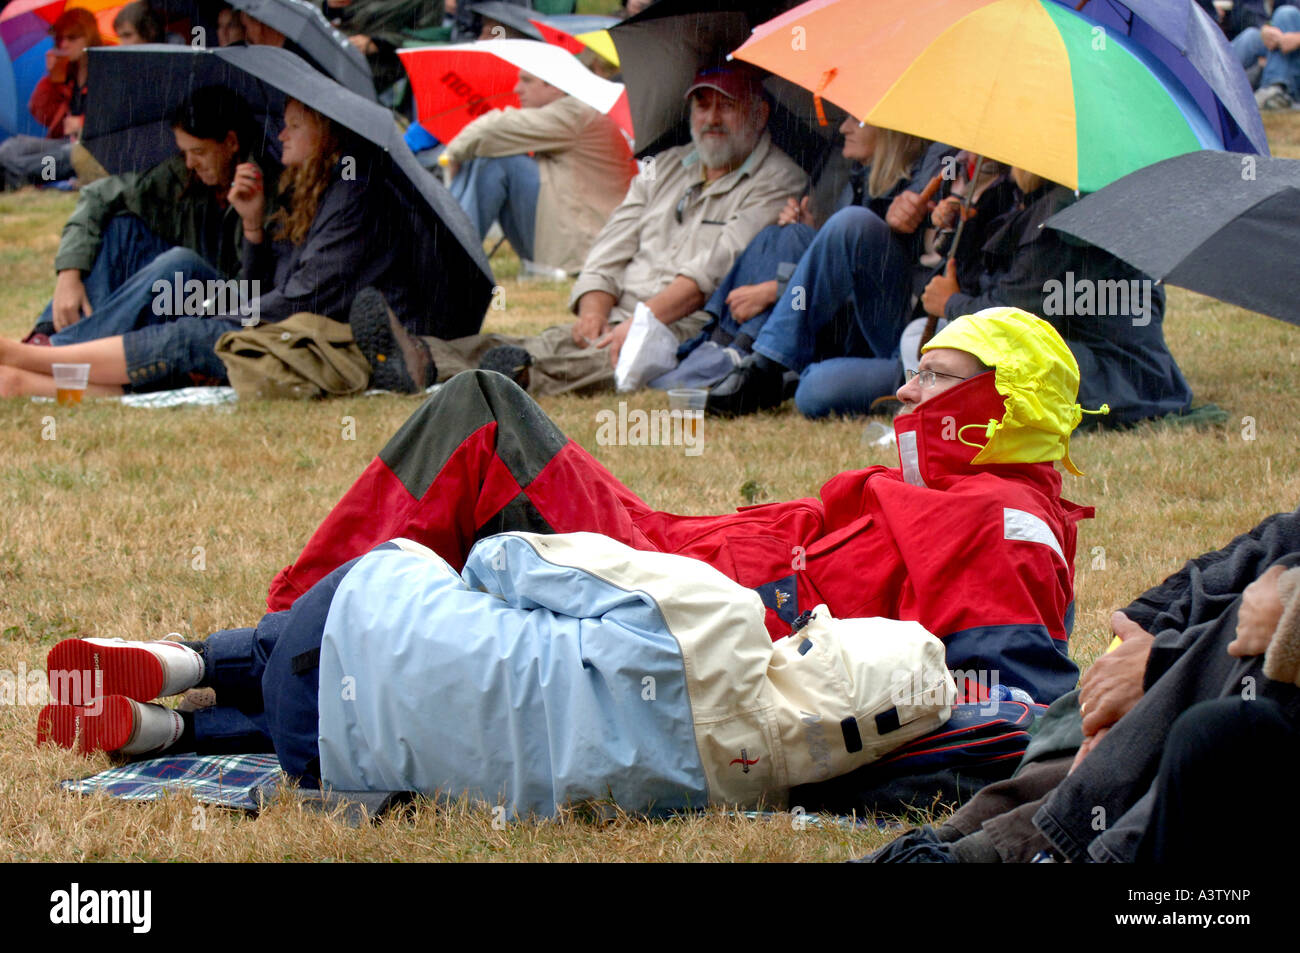 Sheltering from the typical British weather at Vibes From the Vines festival in Horam, East Sussex. Picture by Jim Holden. Stock Photo